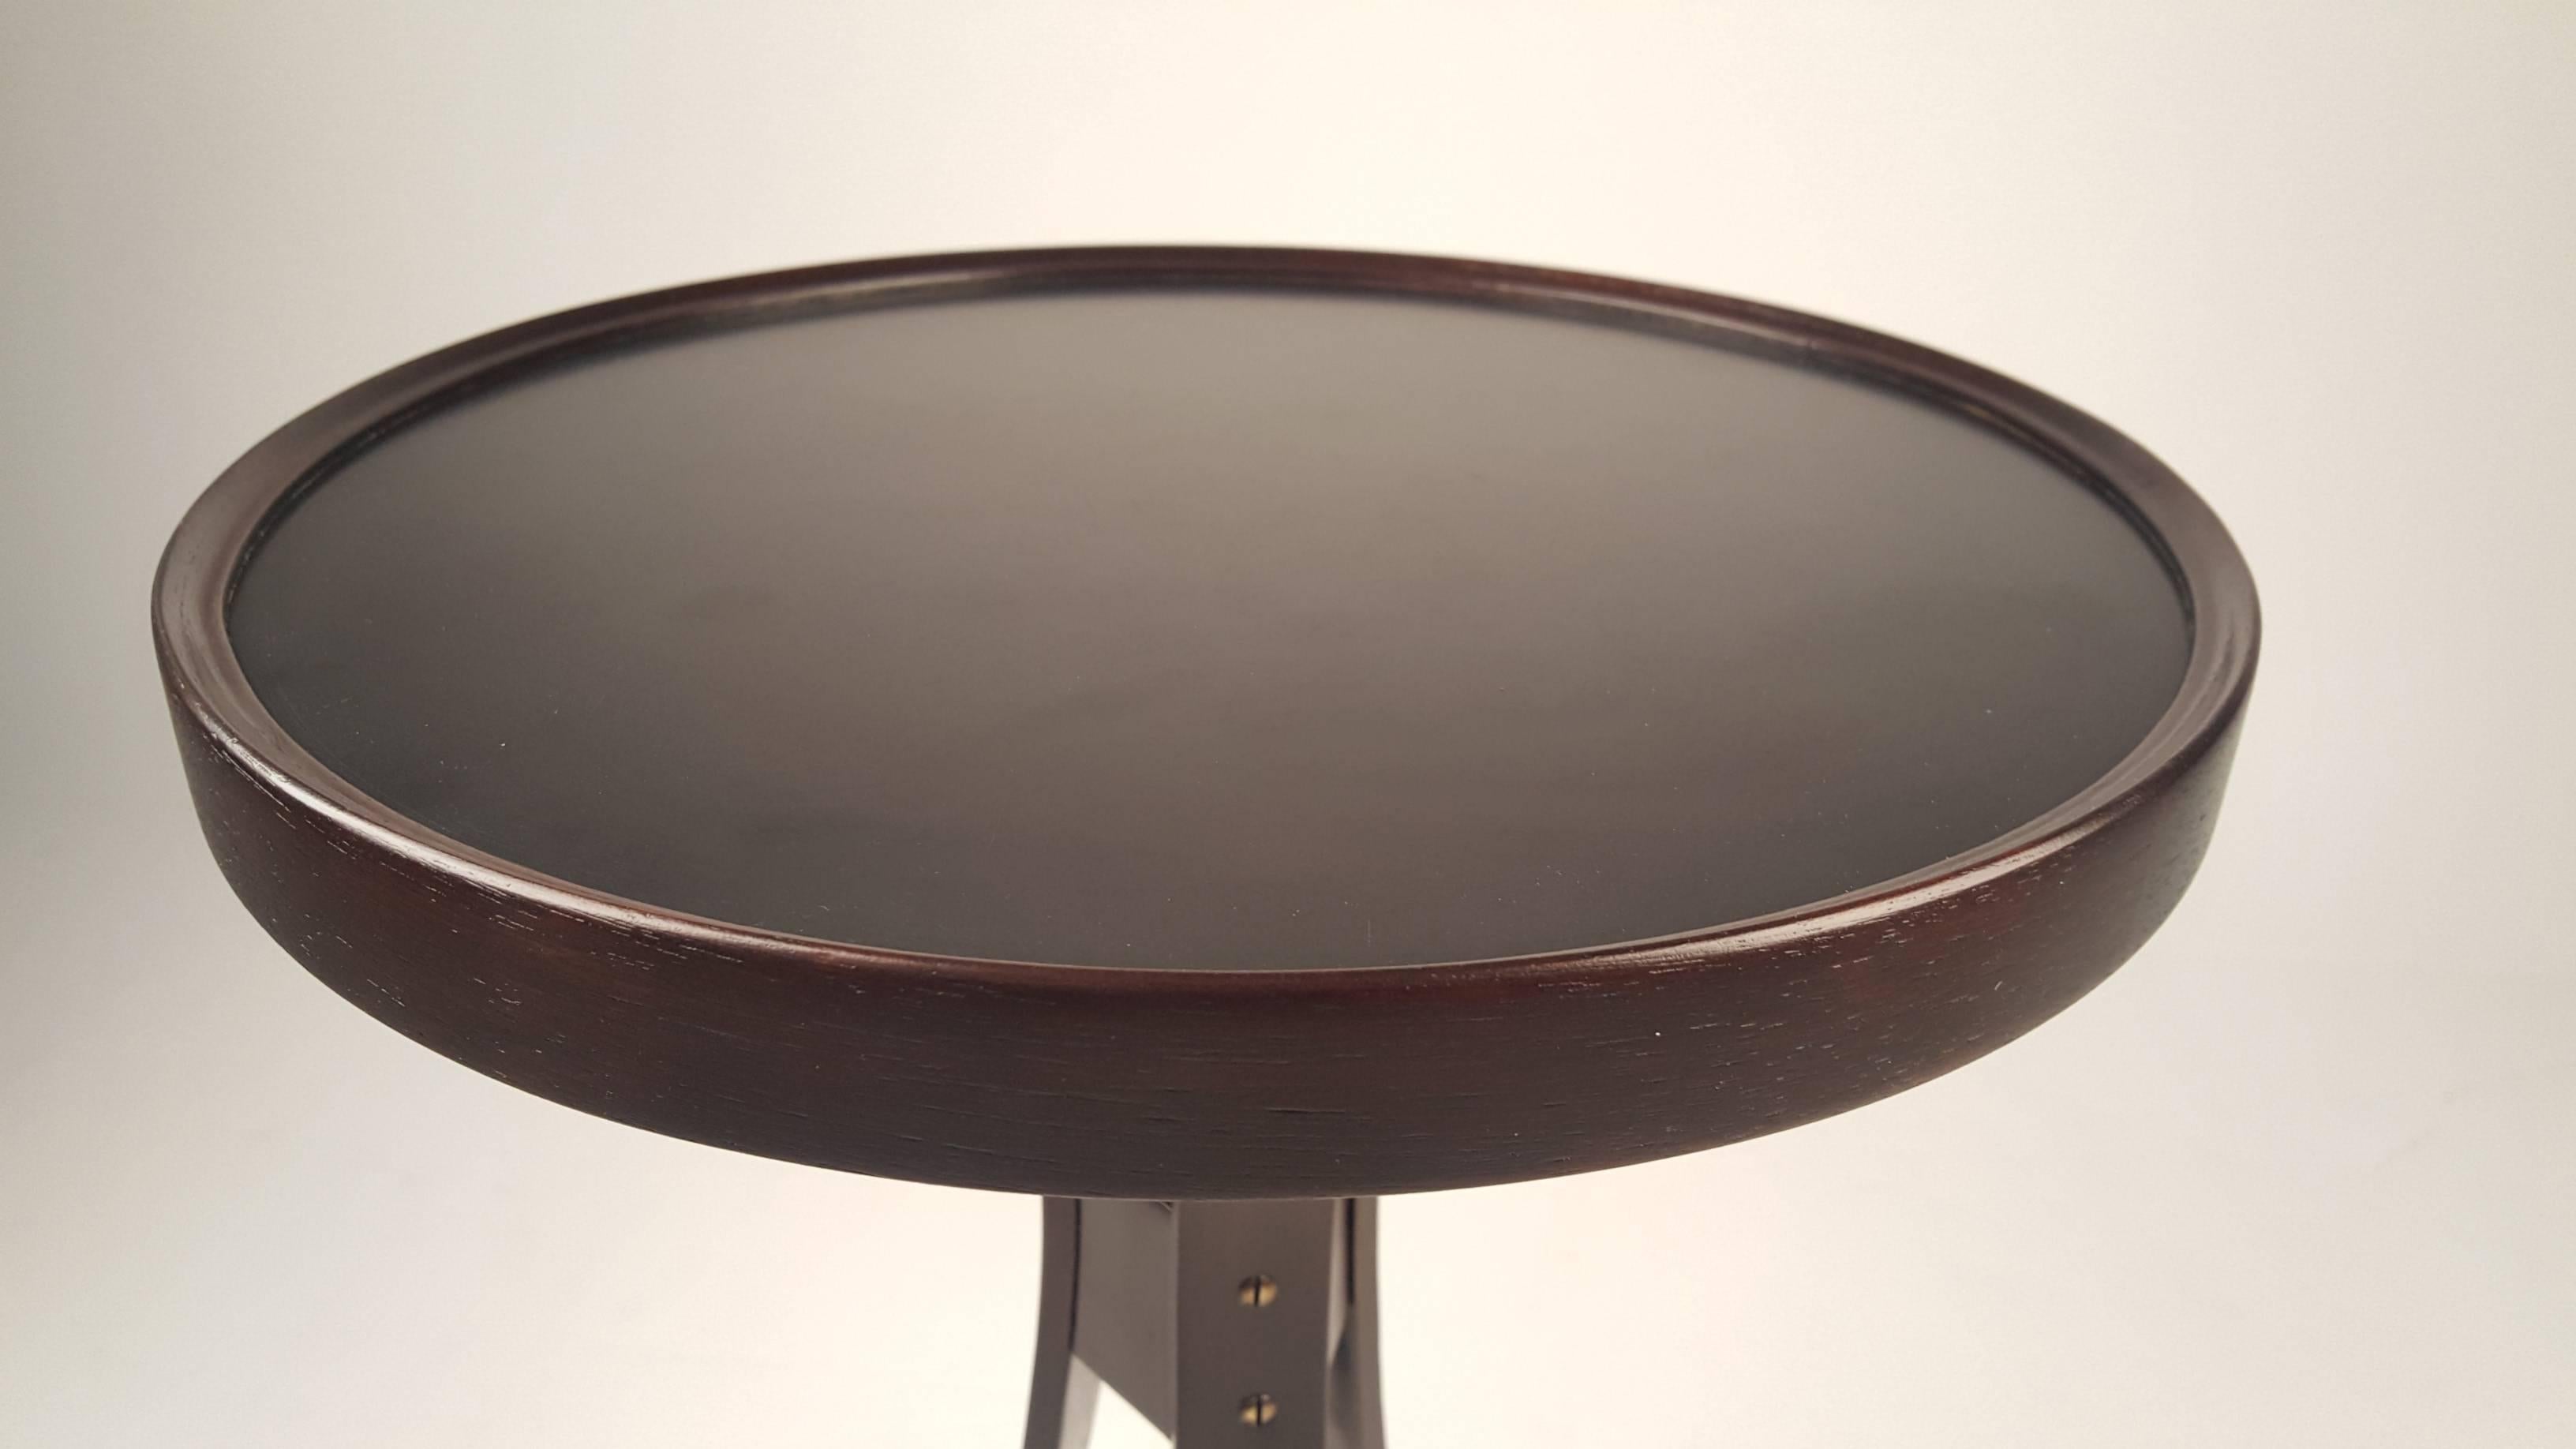 Side table by Roger Sprunger for Dunbar. Very graceful, has slightly raised edge on top. Fully refinished and in excellent condition. Black laminate top.